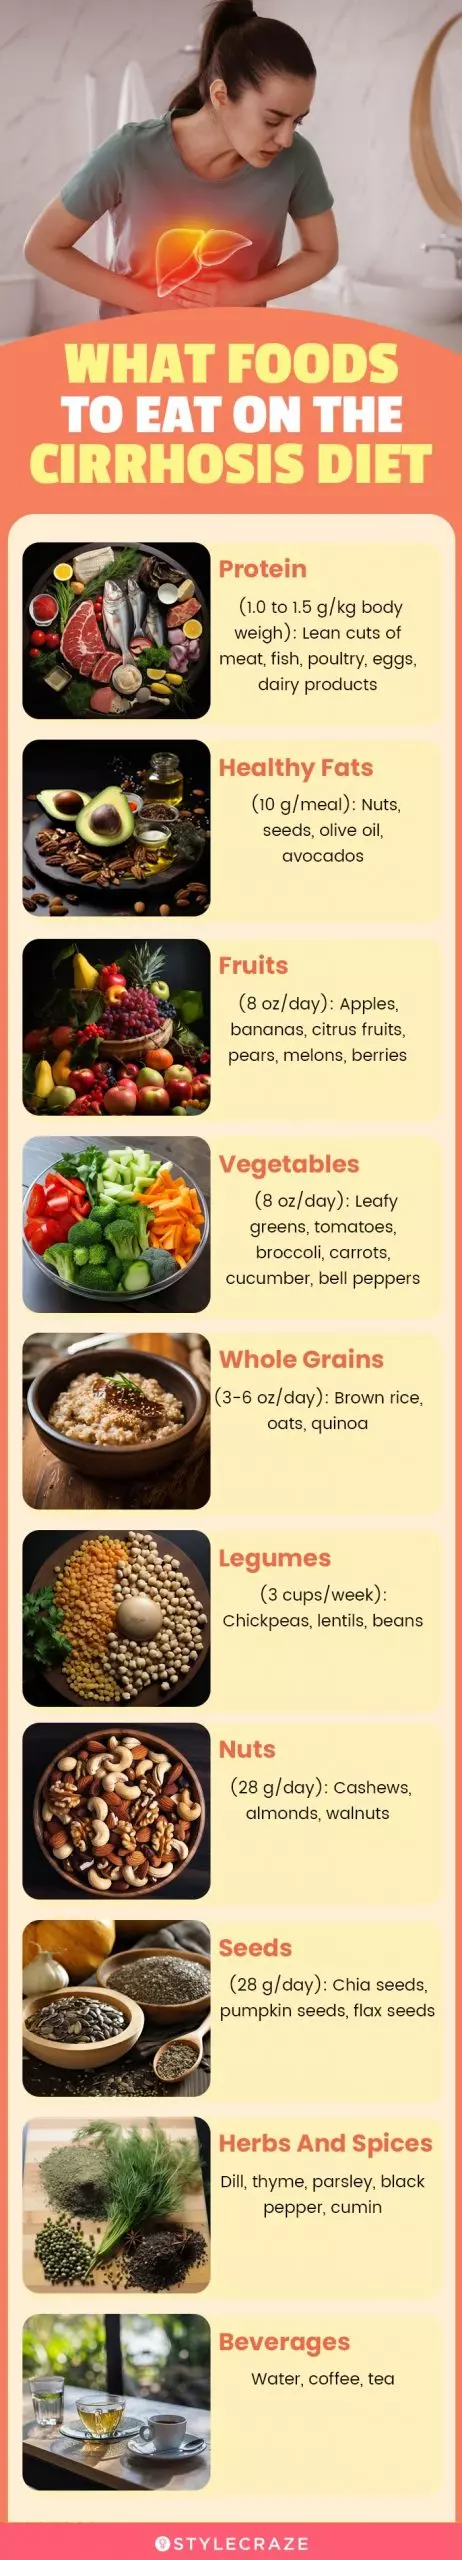 what foods to eat on the cirrhosis diet (infographic)